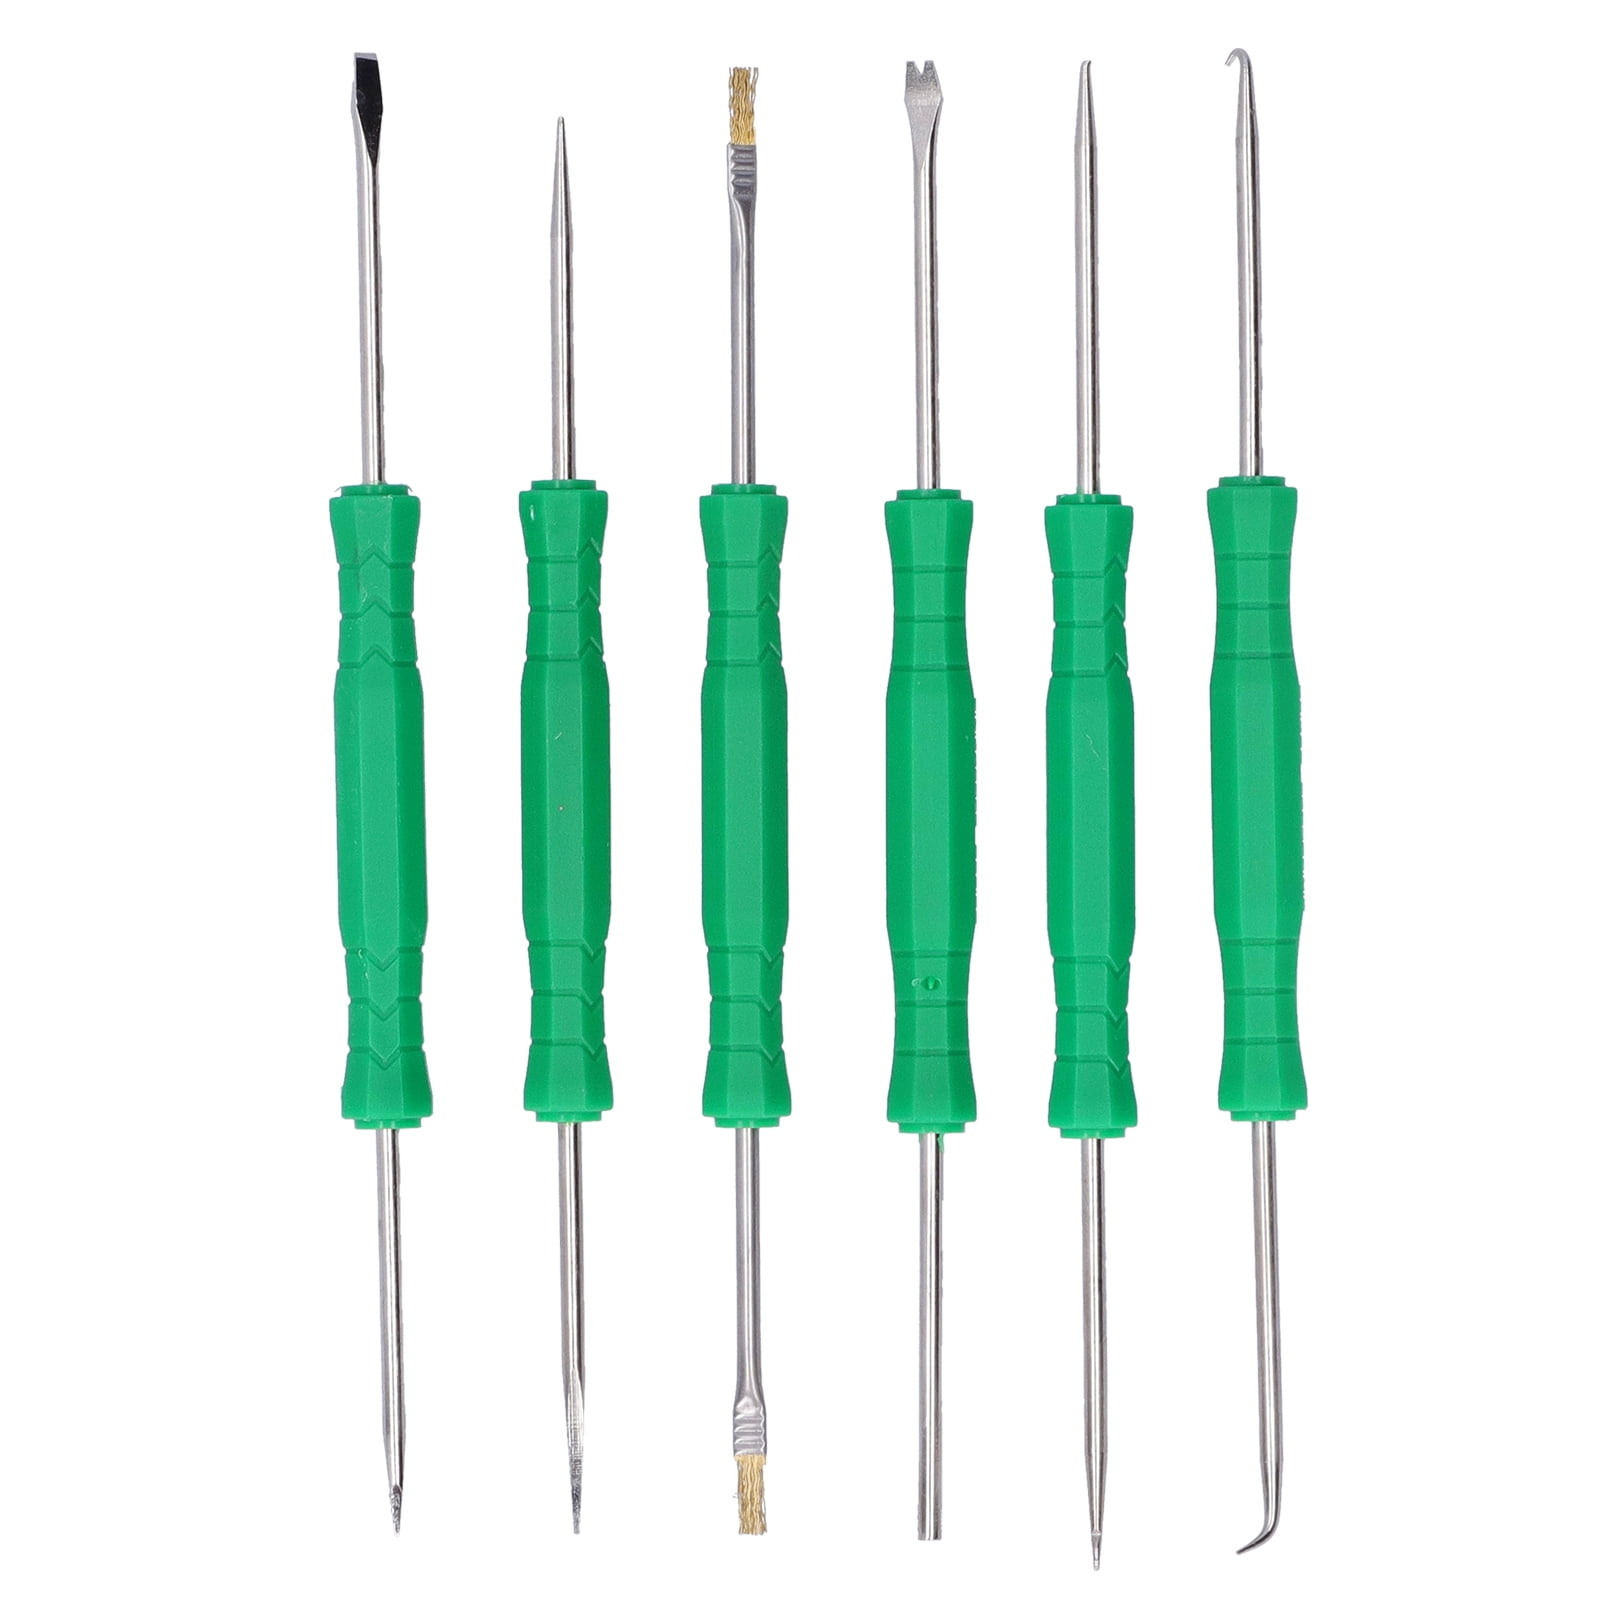 Professional Soldering Assist Aid Electronic Repair Tools Welding Accessory Kits 